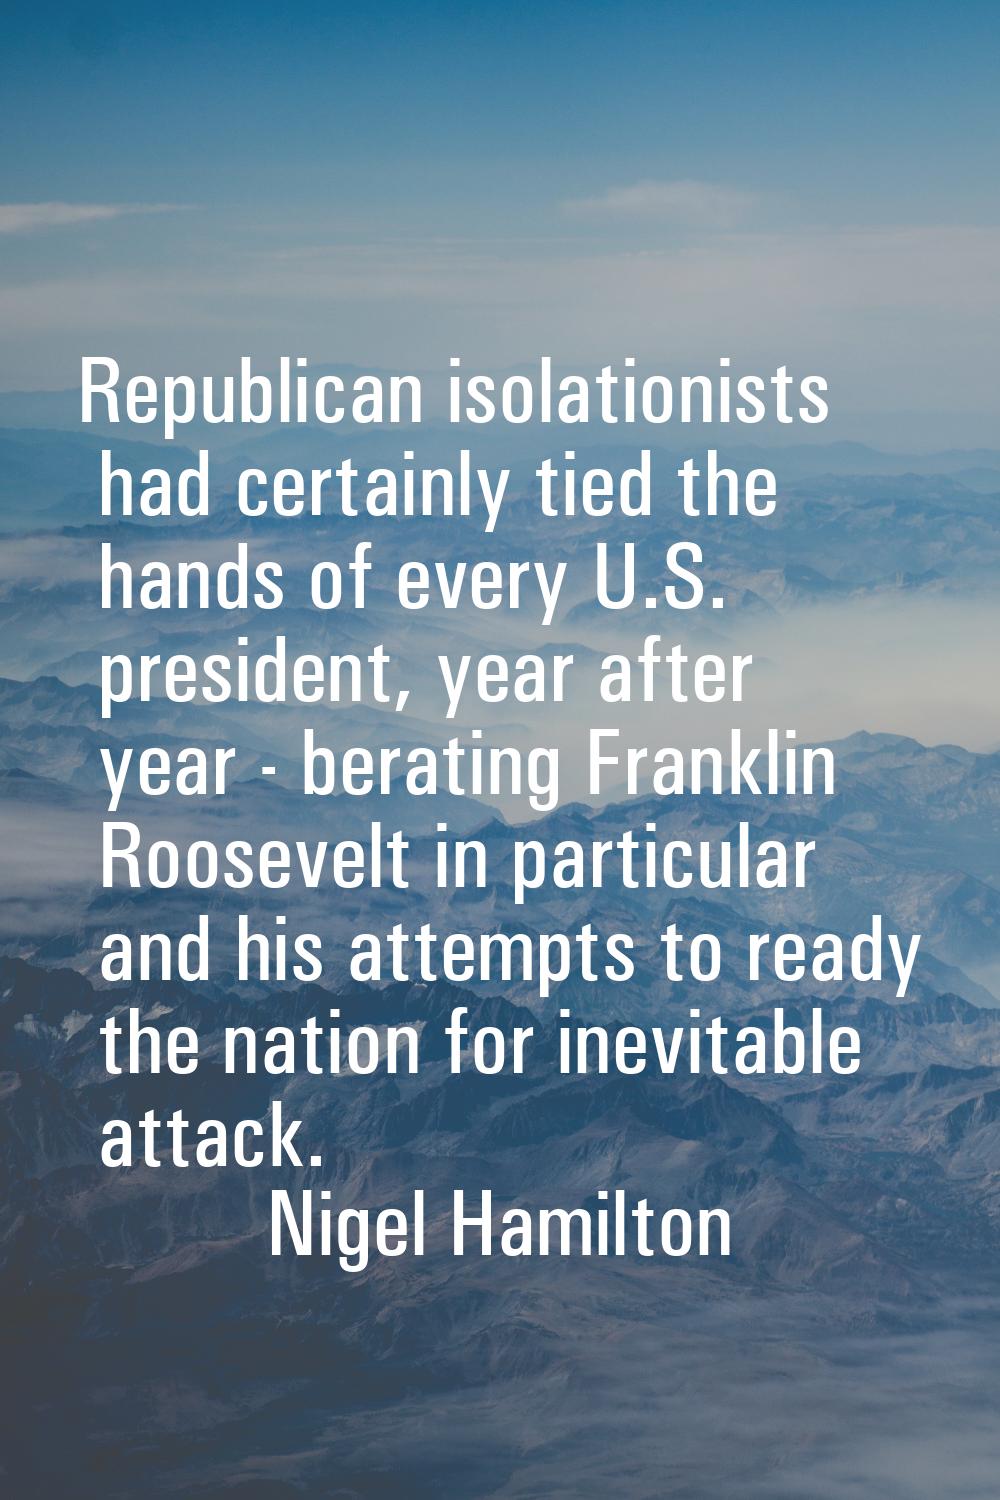 Republican isolationists had certainly tied the hands of every U.S. president, year after year - be